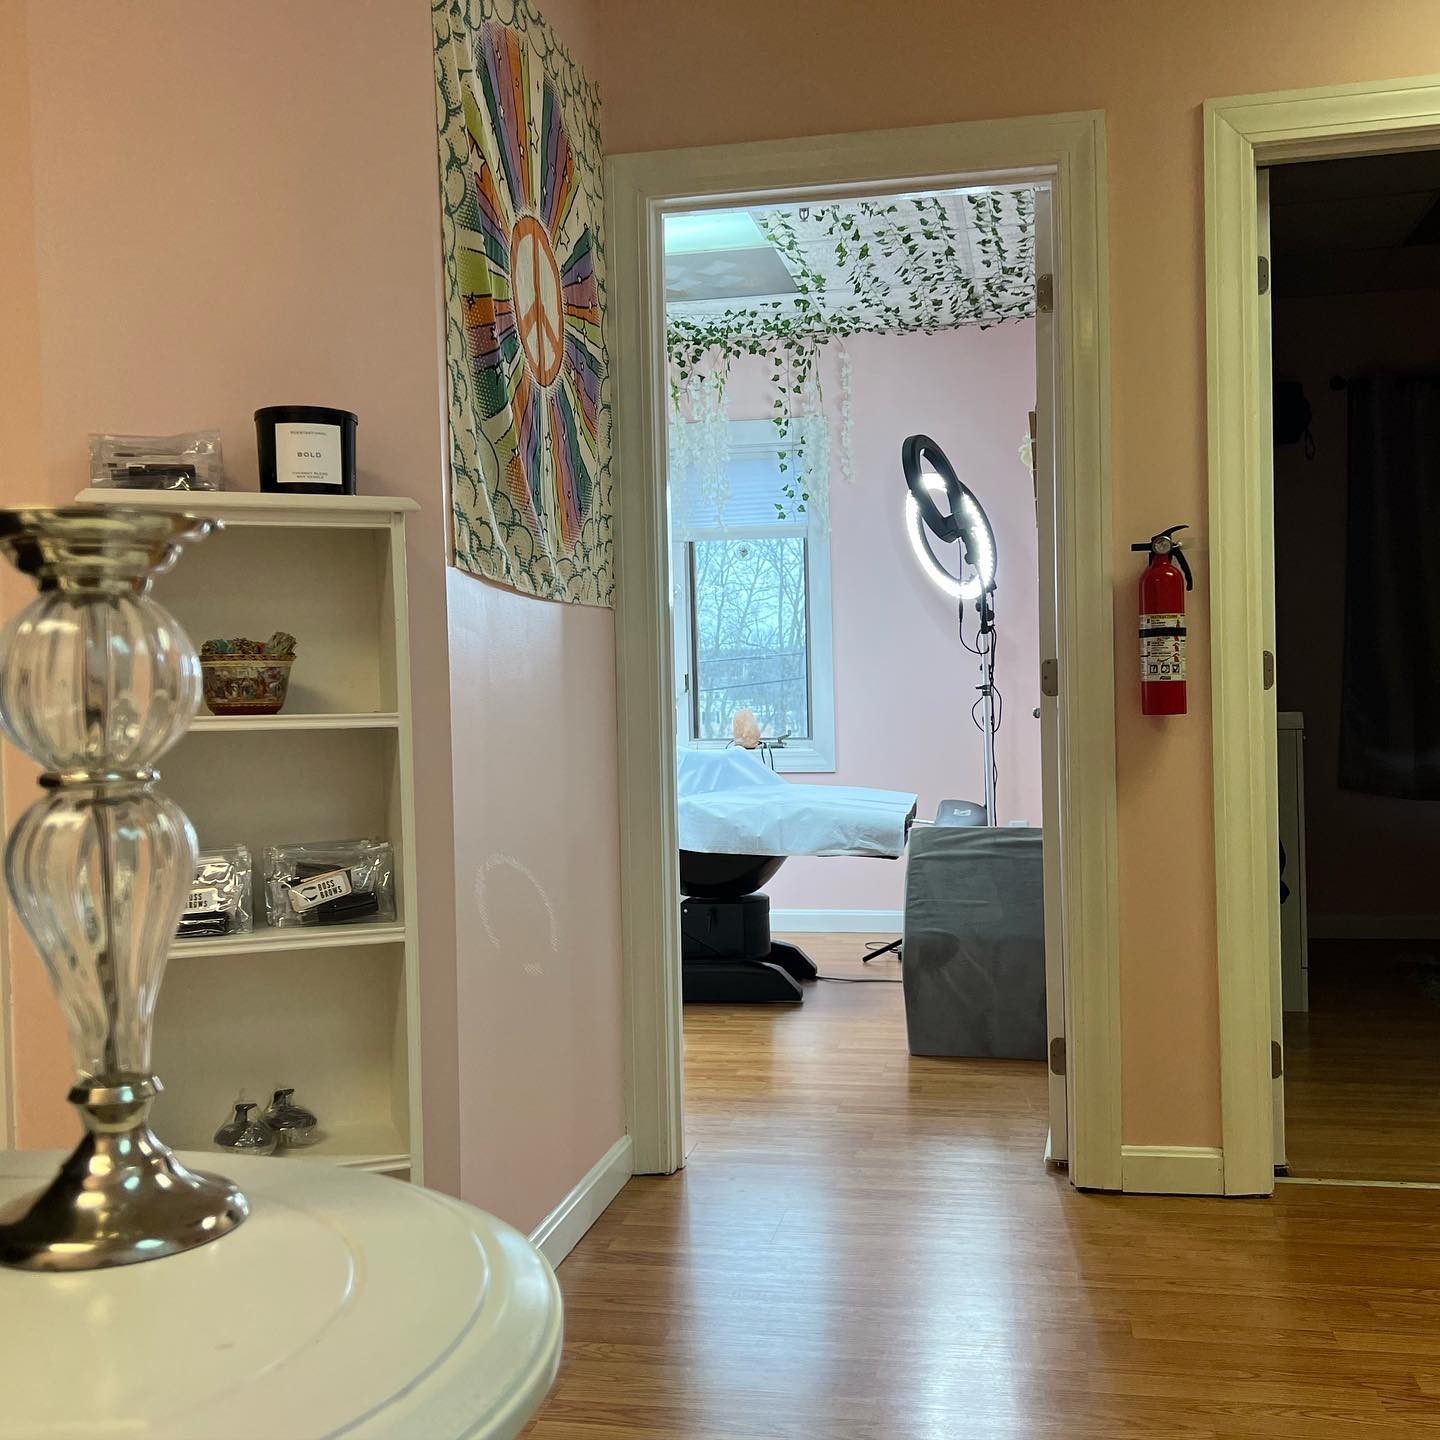 View into my magical treatment room from my desk. 
Brow Spell
A sprinkle of hope
A dash of imagination 
A touch of artistry
And a bunch of good vibes
🪄🪄🪄🪄🪄🪄🪄🪄🪄🪄
#winkandinked #nhwinkbabe #derrynh #londonderrynh #bedfordnh #manchesternh #portsmouthnh #newhampshire #nhbrows #bostonbrows #nhmicroblading #nhombrebrows #nhcosmetictattoo #nhtattoo #nhtattooartist #nhtattoomakeup #nheyelinertattoo #nhbrowartist #nhbrowspecialist #nhmade #nhsalon #nhwinkbrows #nhwinkeyeliner #christinadoesbrows #nheyebrows #nhmakeupartist #nhpermanentmakeup #nhseacoast #nhbrowsalon